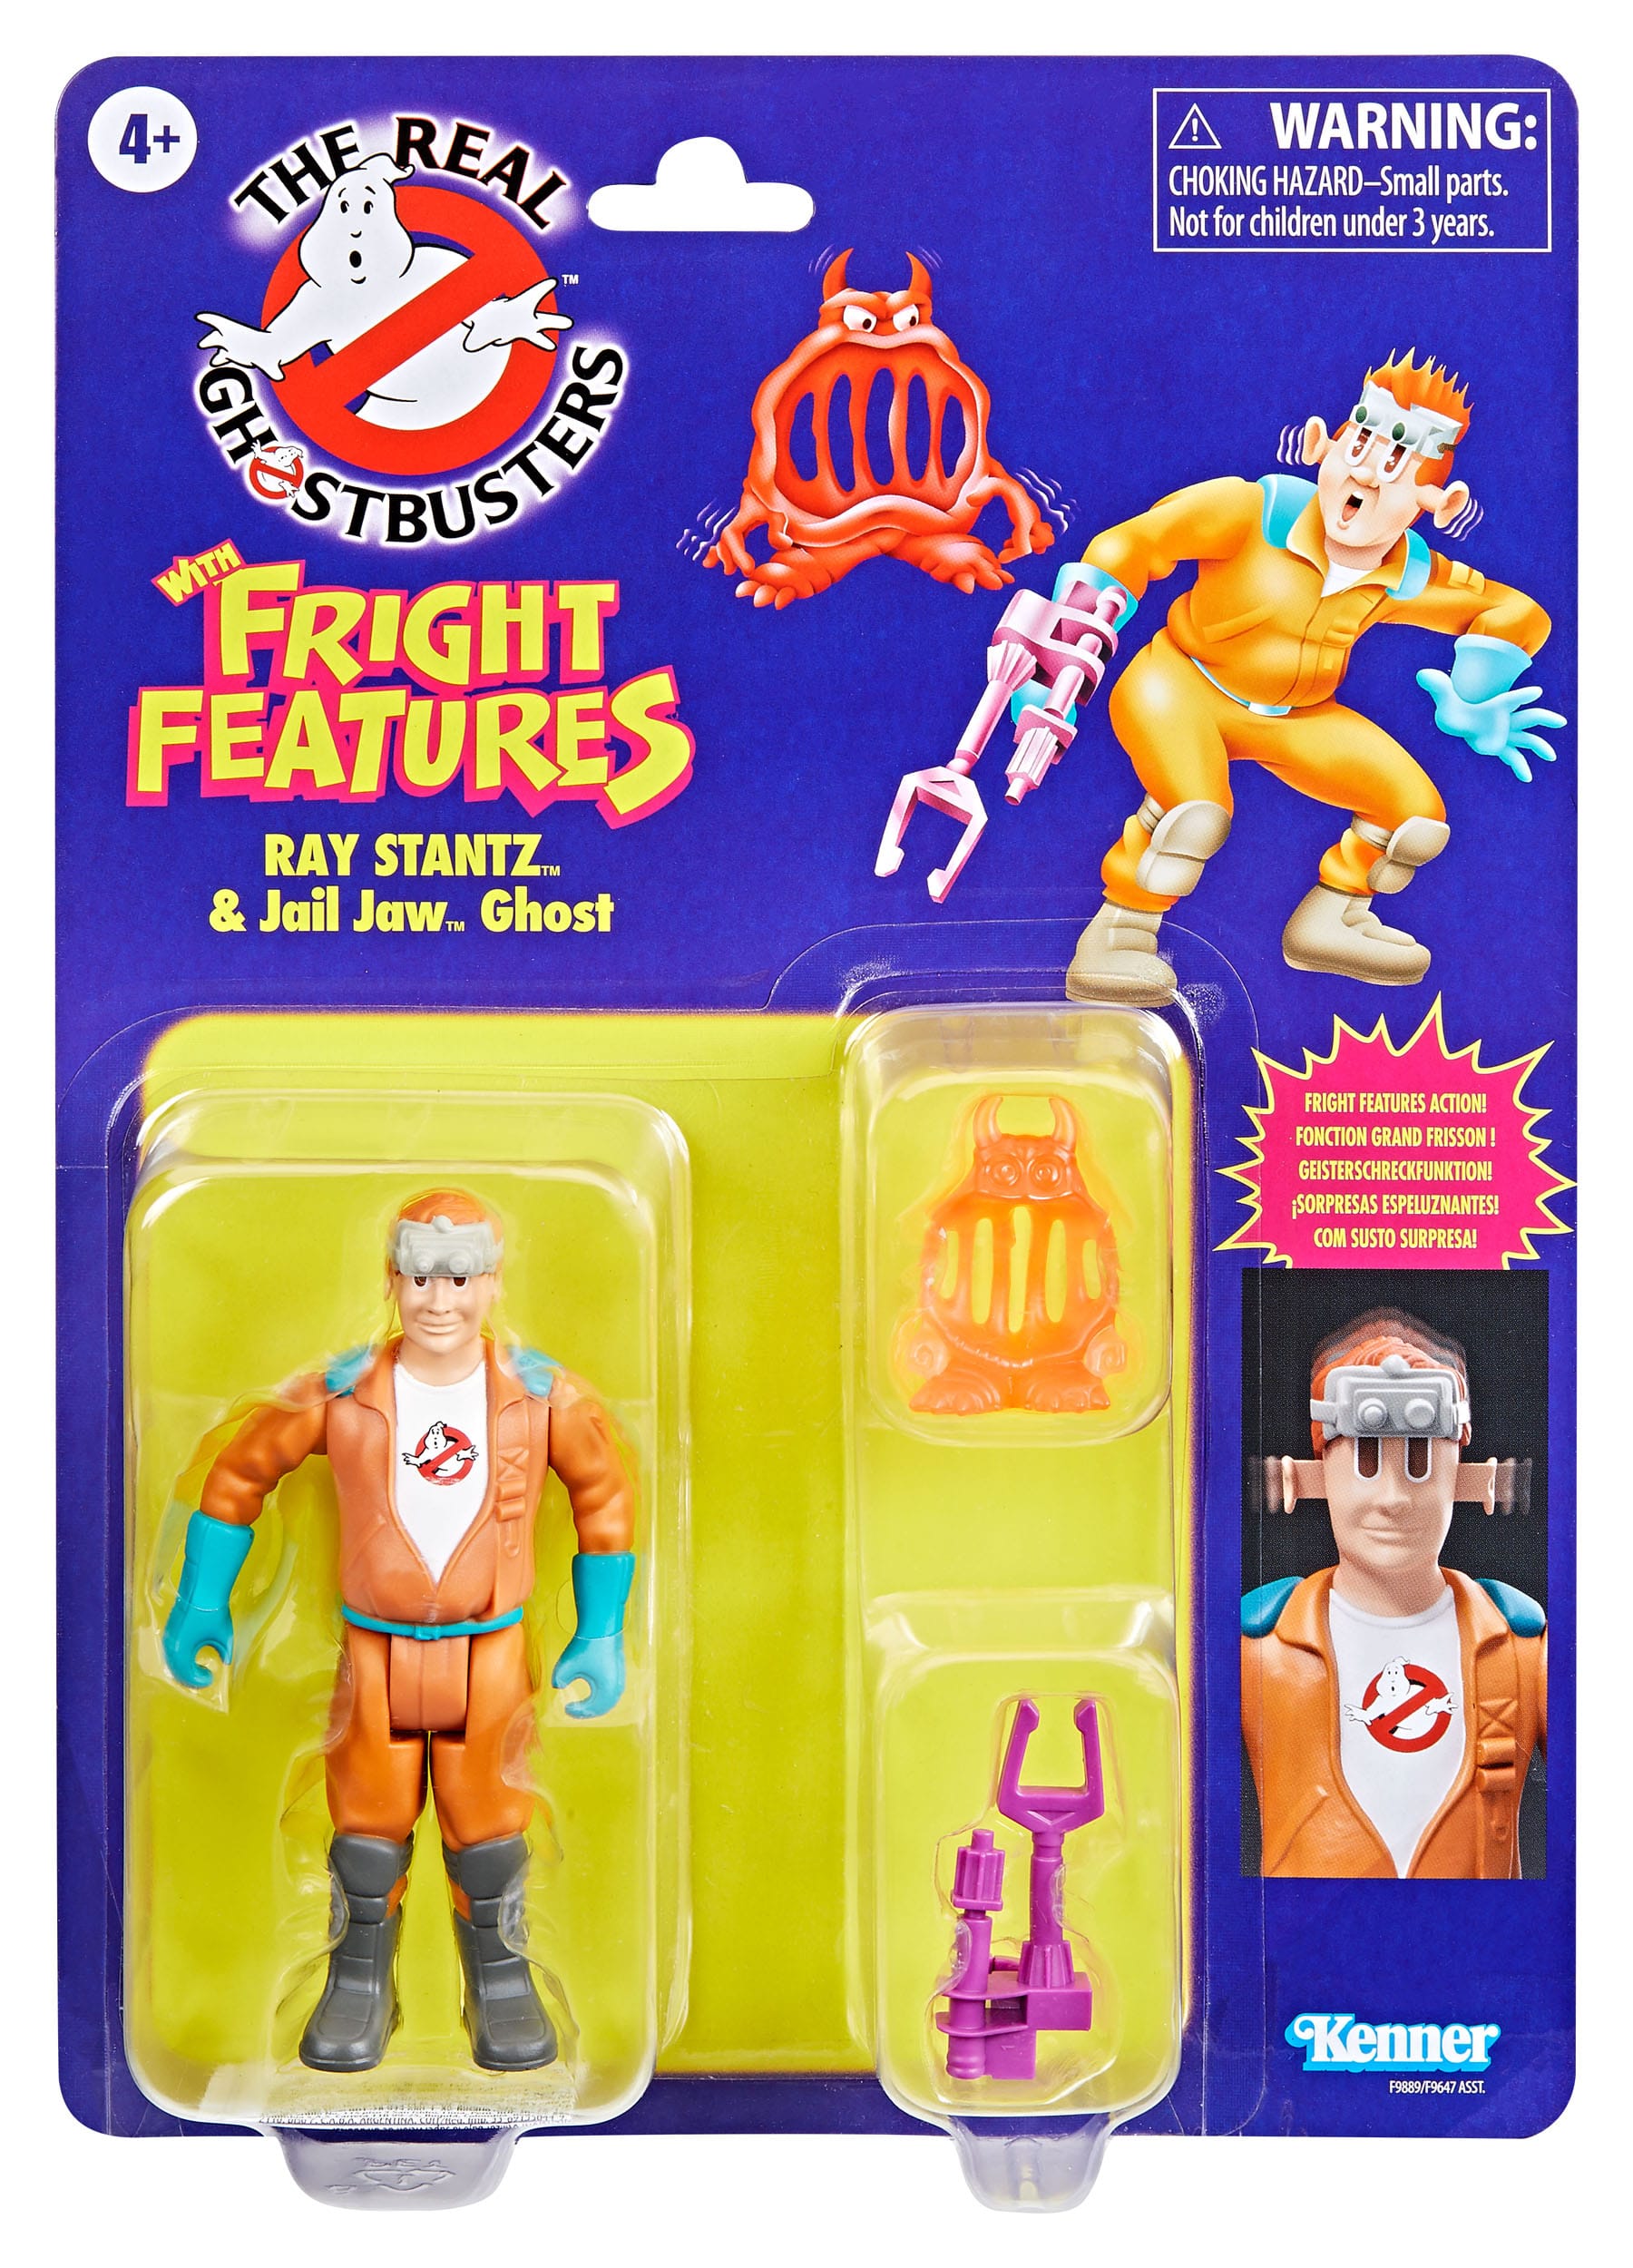 The Real Ghostbusters Kenner Classics Actionfigur Ray Stantz & Jail Jaw Ghost HASF9889 5010996219602